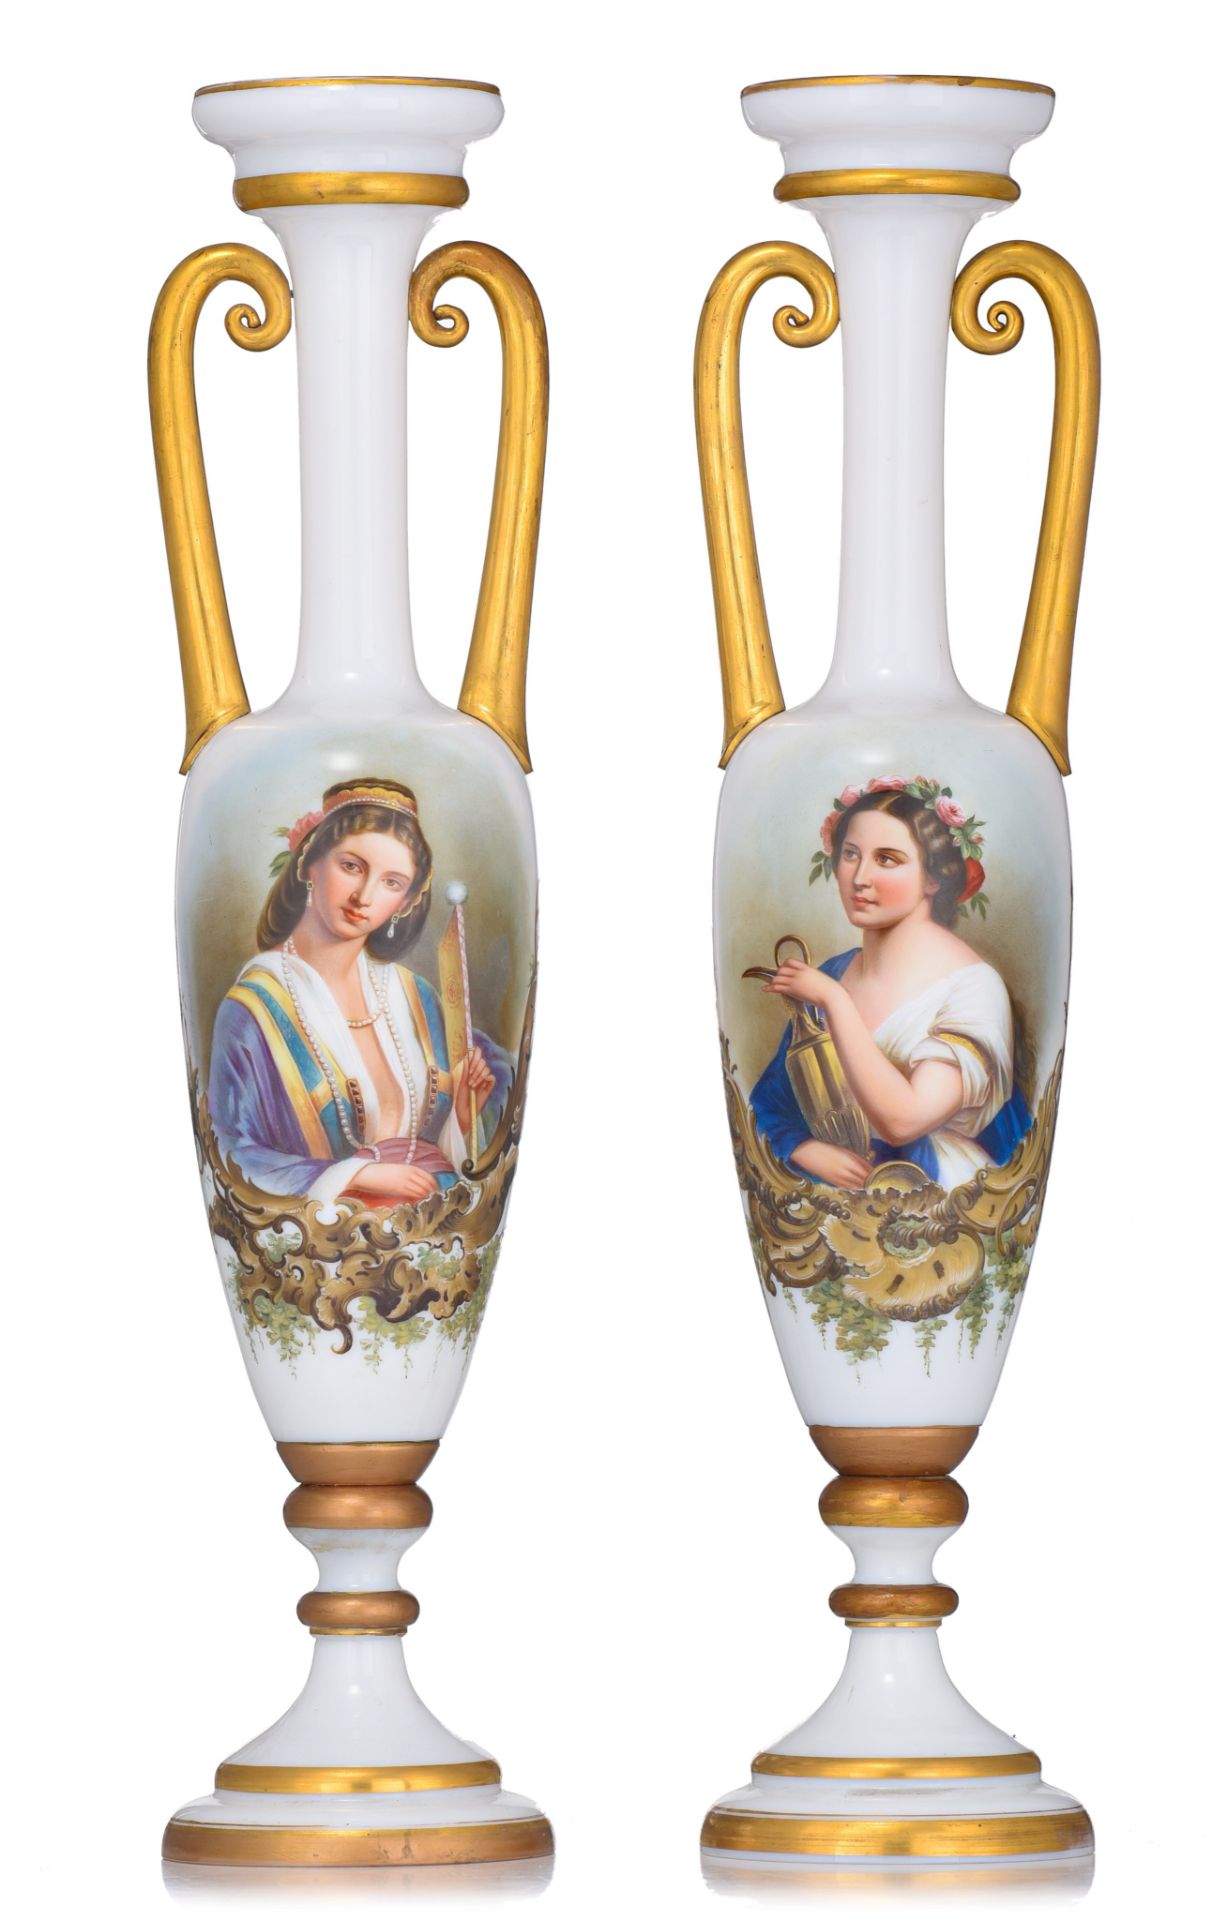 A fine pair of Neoclassical oblong opaline vases, polychrome and gilt decorated, H 65 cm